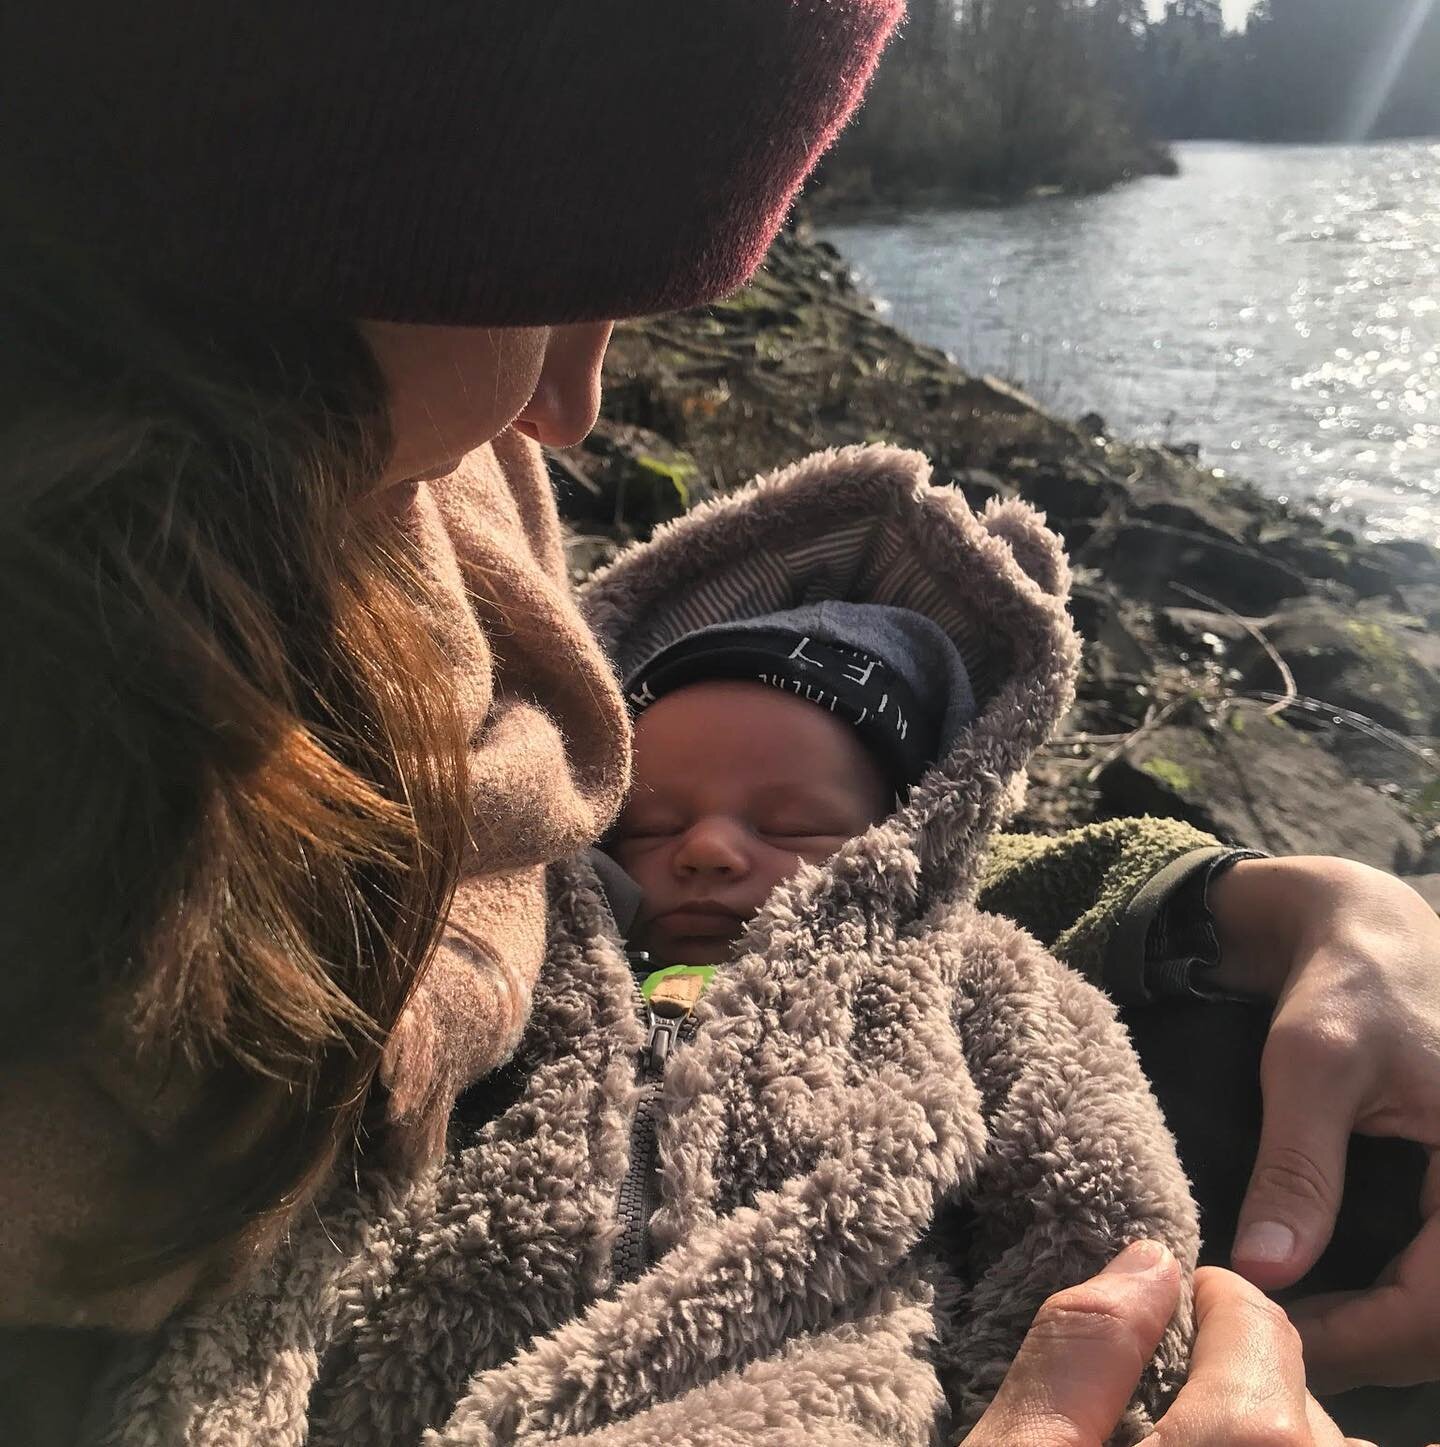 Meet Margot, the newest addition to our beautiful, flourishing family, enjoying this blessed winter sunshine by the river! ✨

📷: flourishing papa @eric.lillstrom 

#flourishingbabies #adventureswithinfants #getyourvitamind #babiesbytheriver